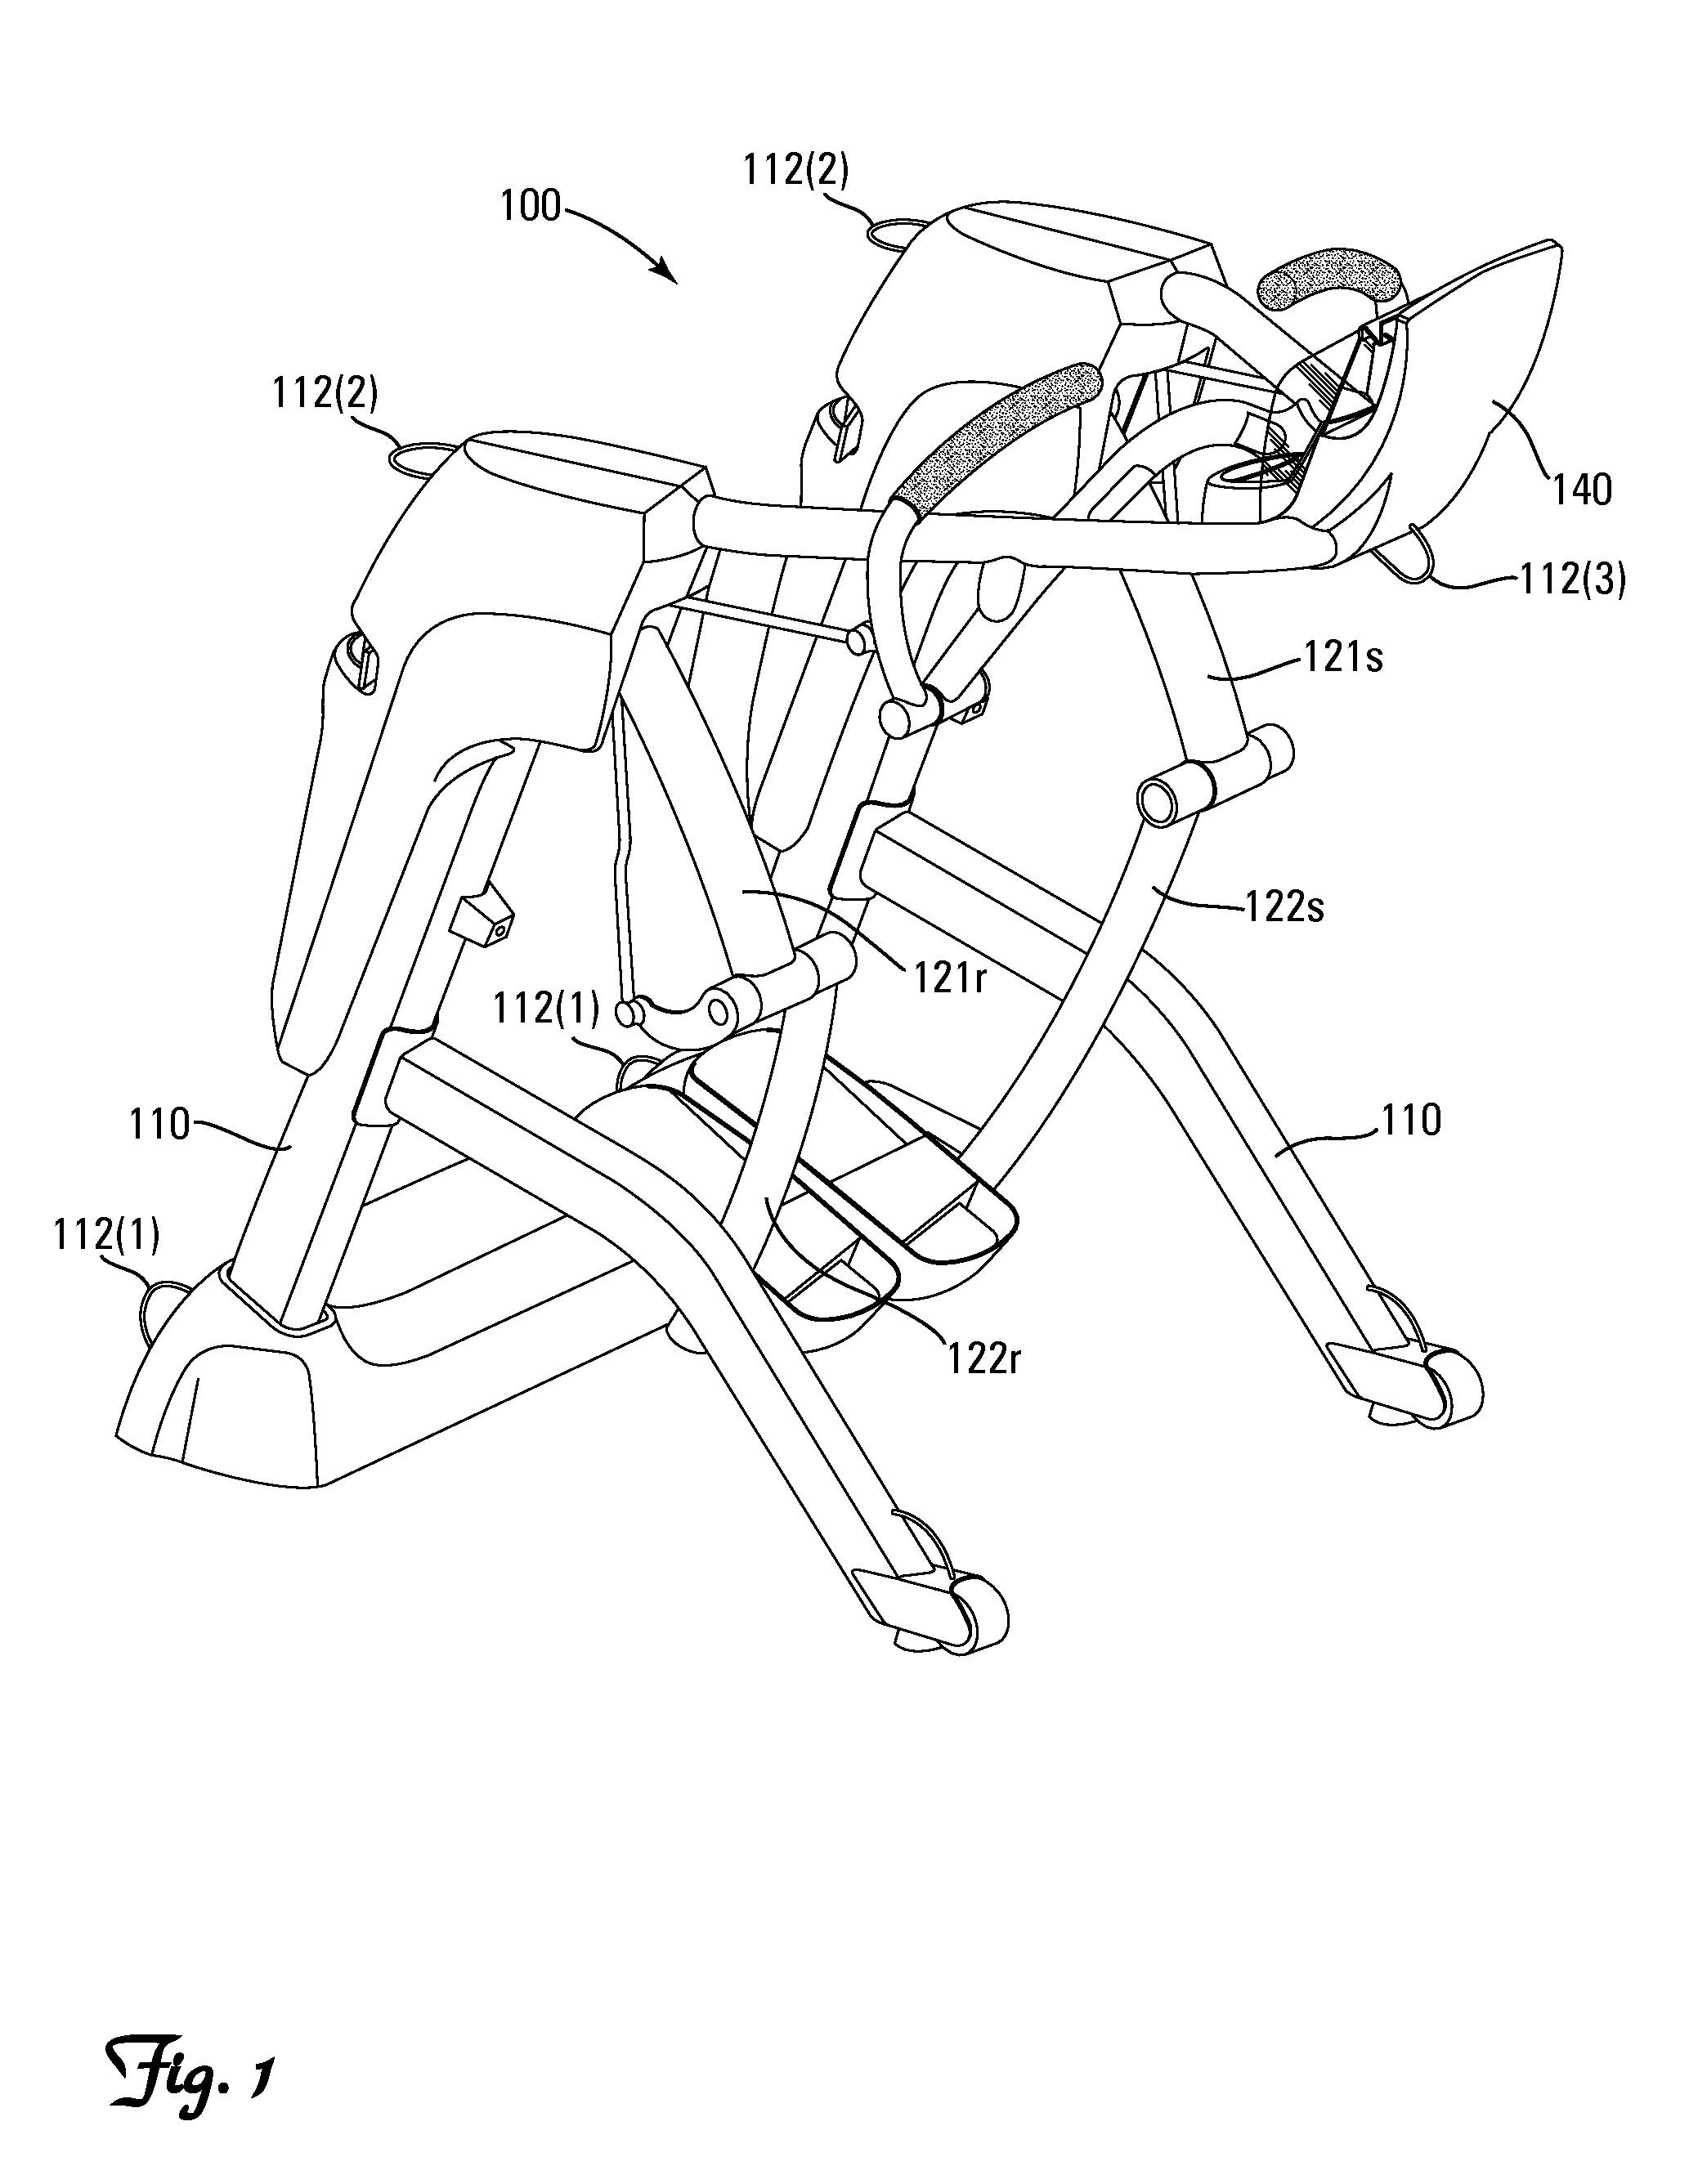 Lower body mimetic exercise device with fully or partially autonomous right and left leg links and ergonomically positioned pivot points